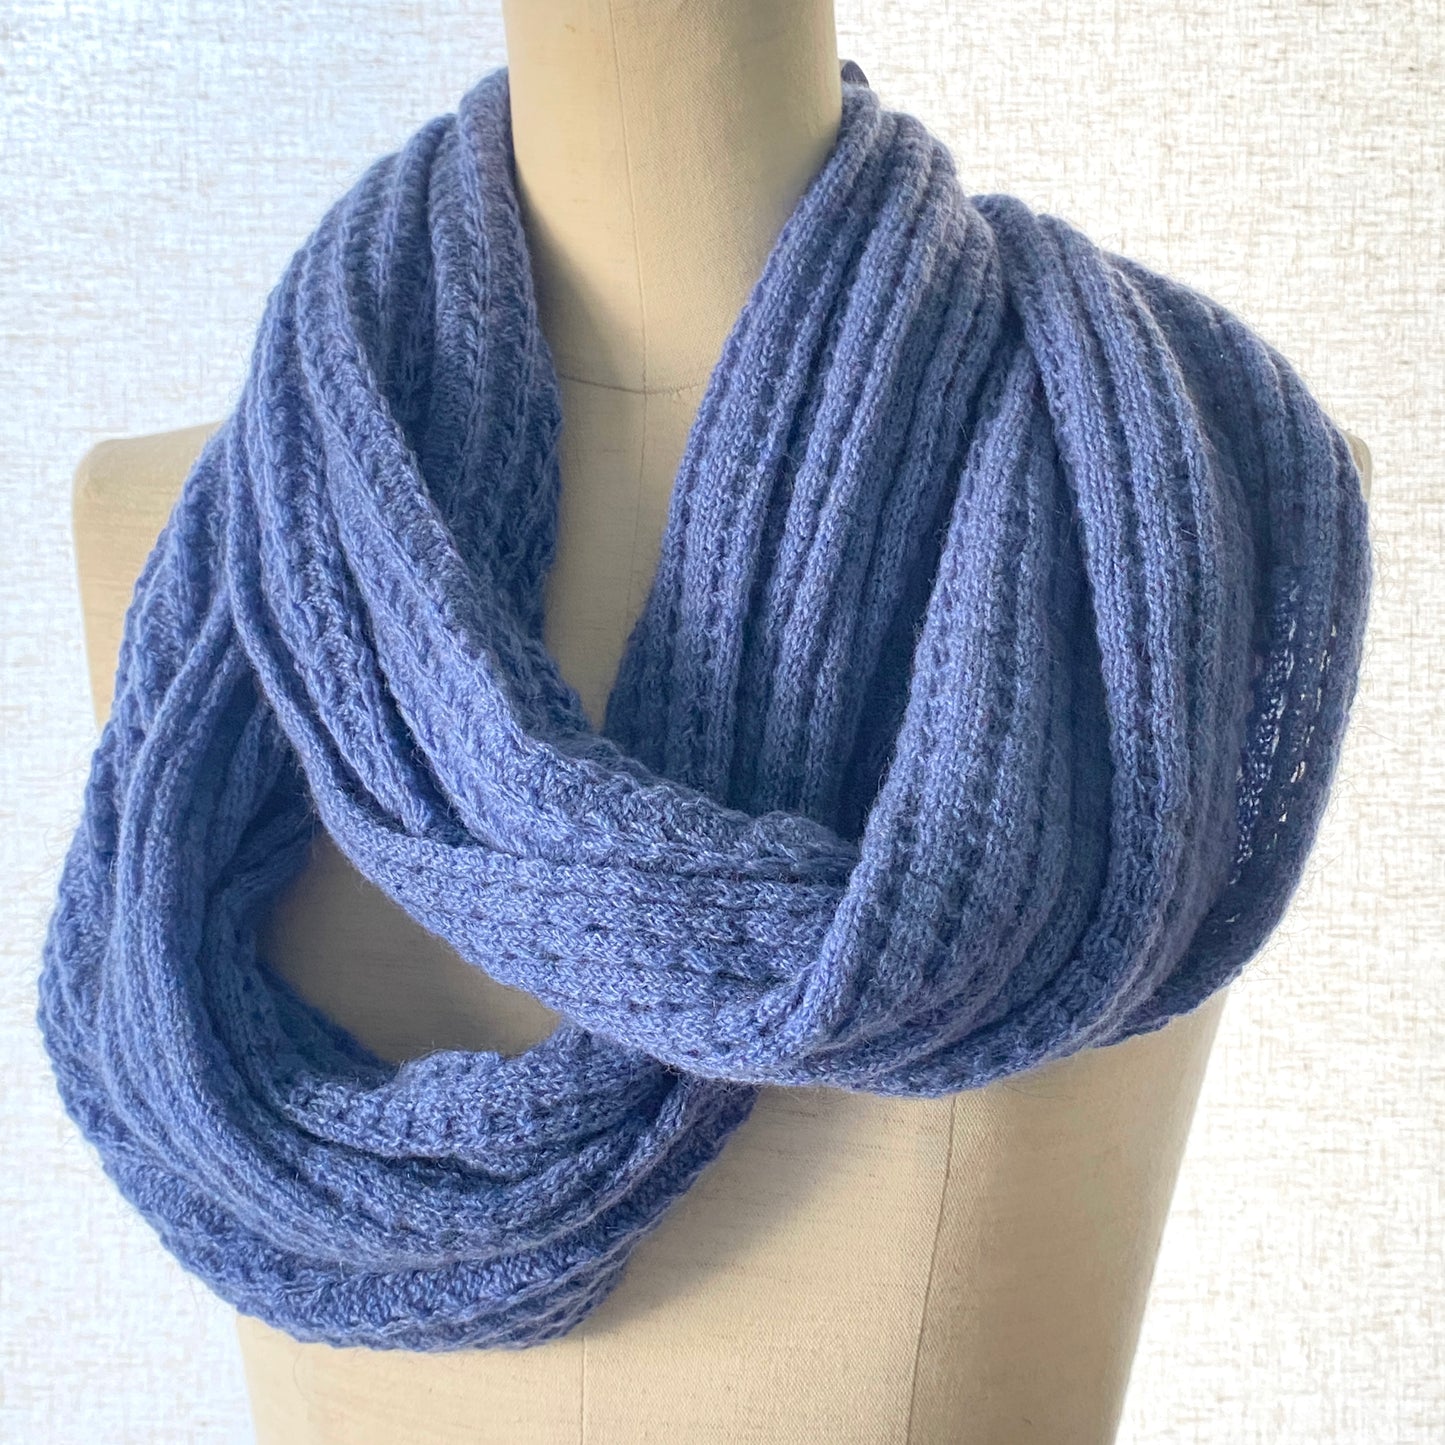 Scarf: Lace Endless Scarf, Made in New Zealand, Merino Wool Possum Scarf, Two Colours to Choose From